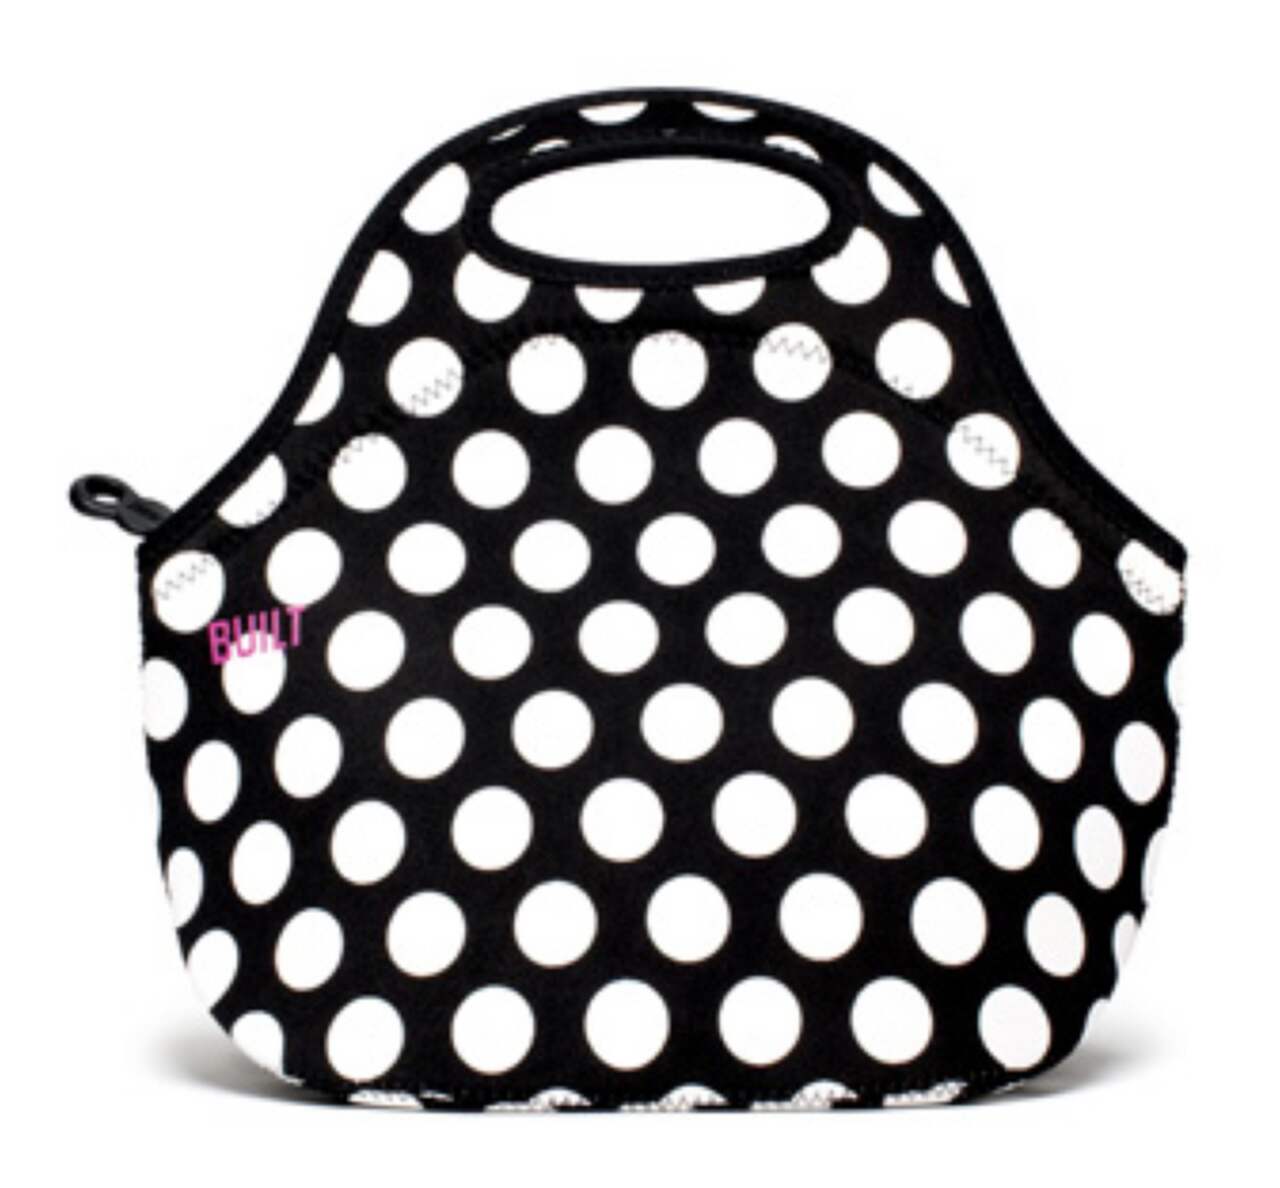 Built Gourmet Big Dot Lunch Bag Water Resistant, Black and White